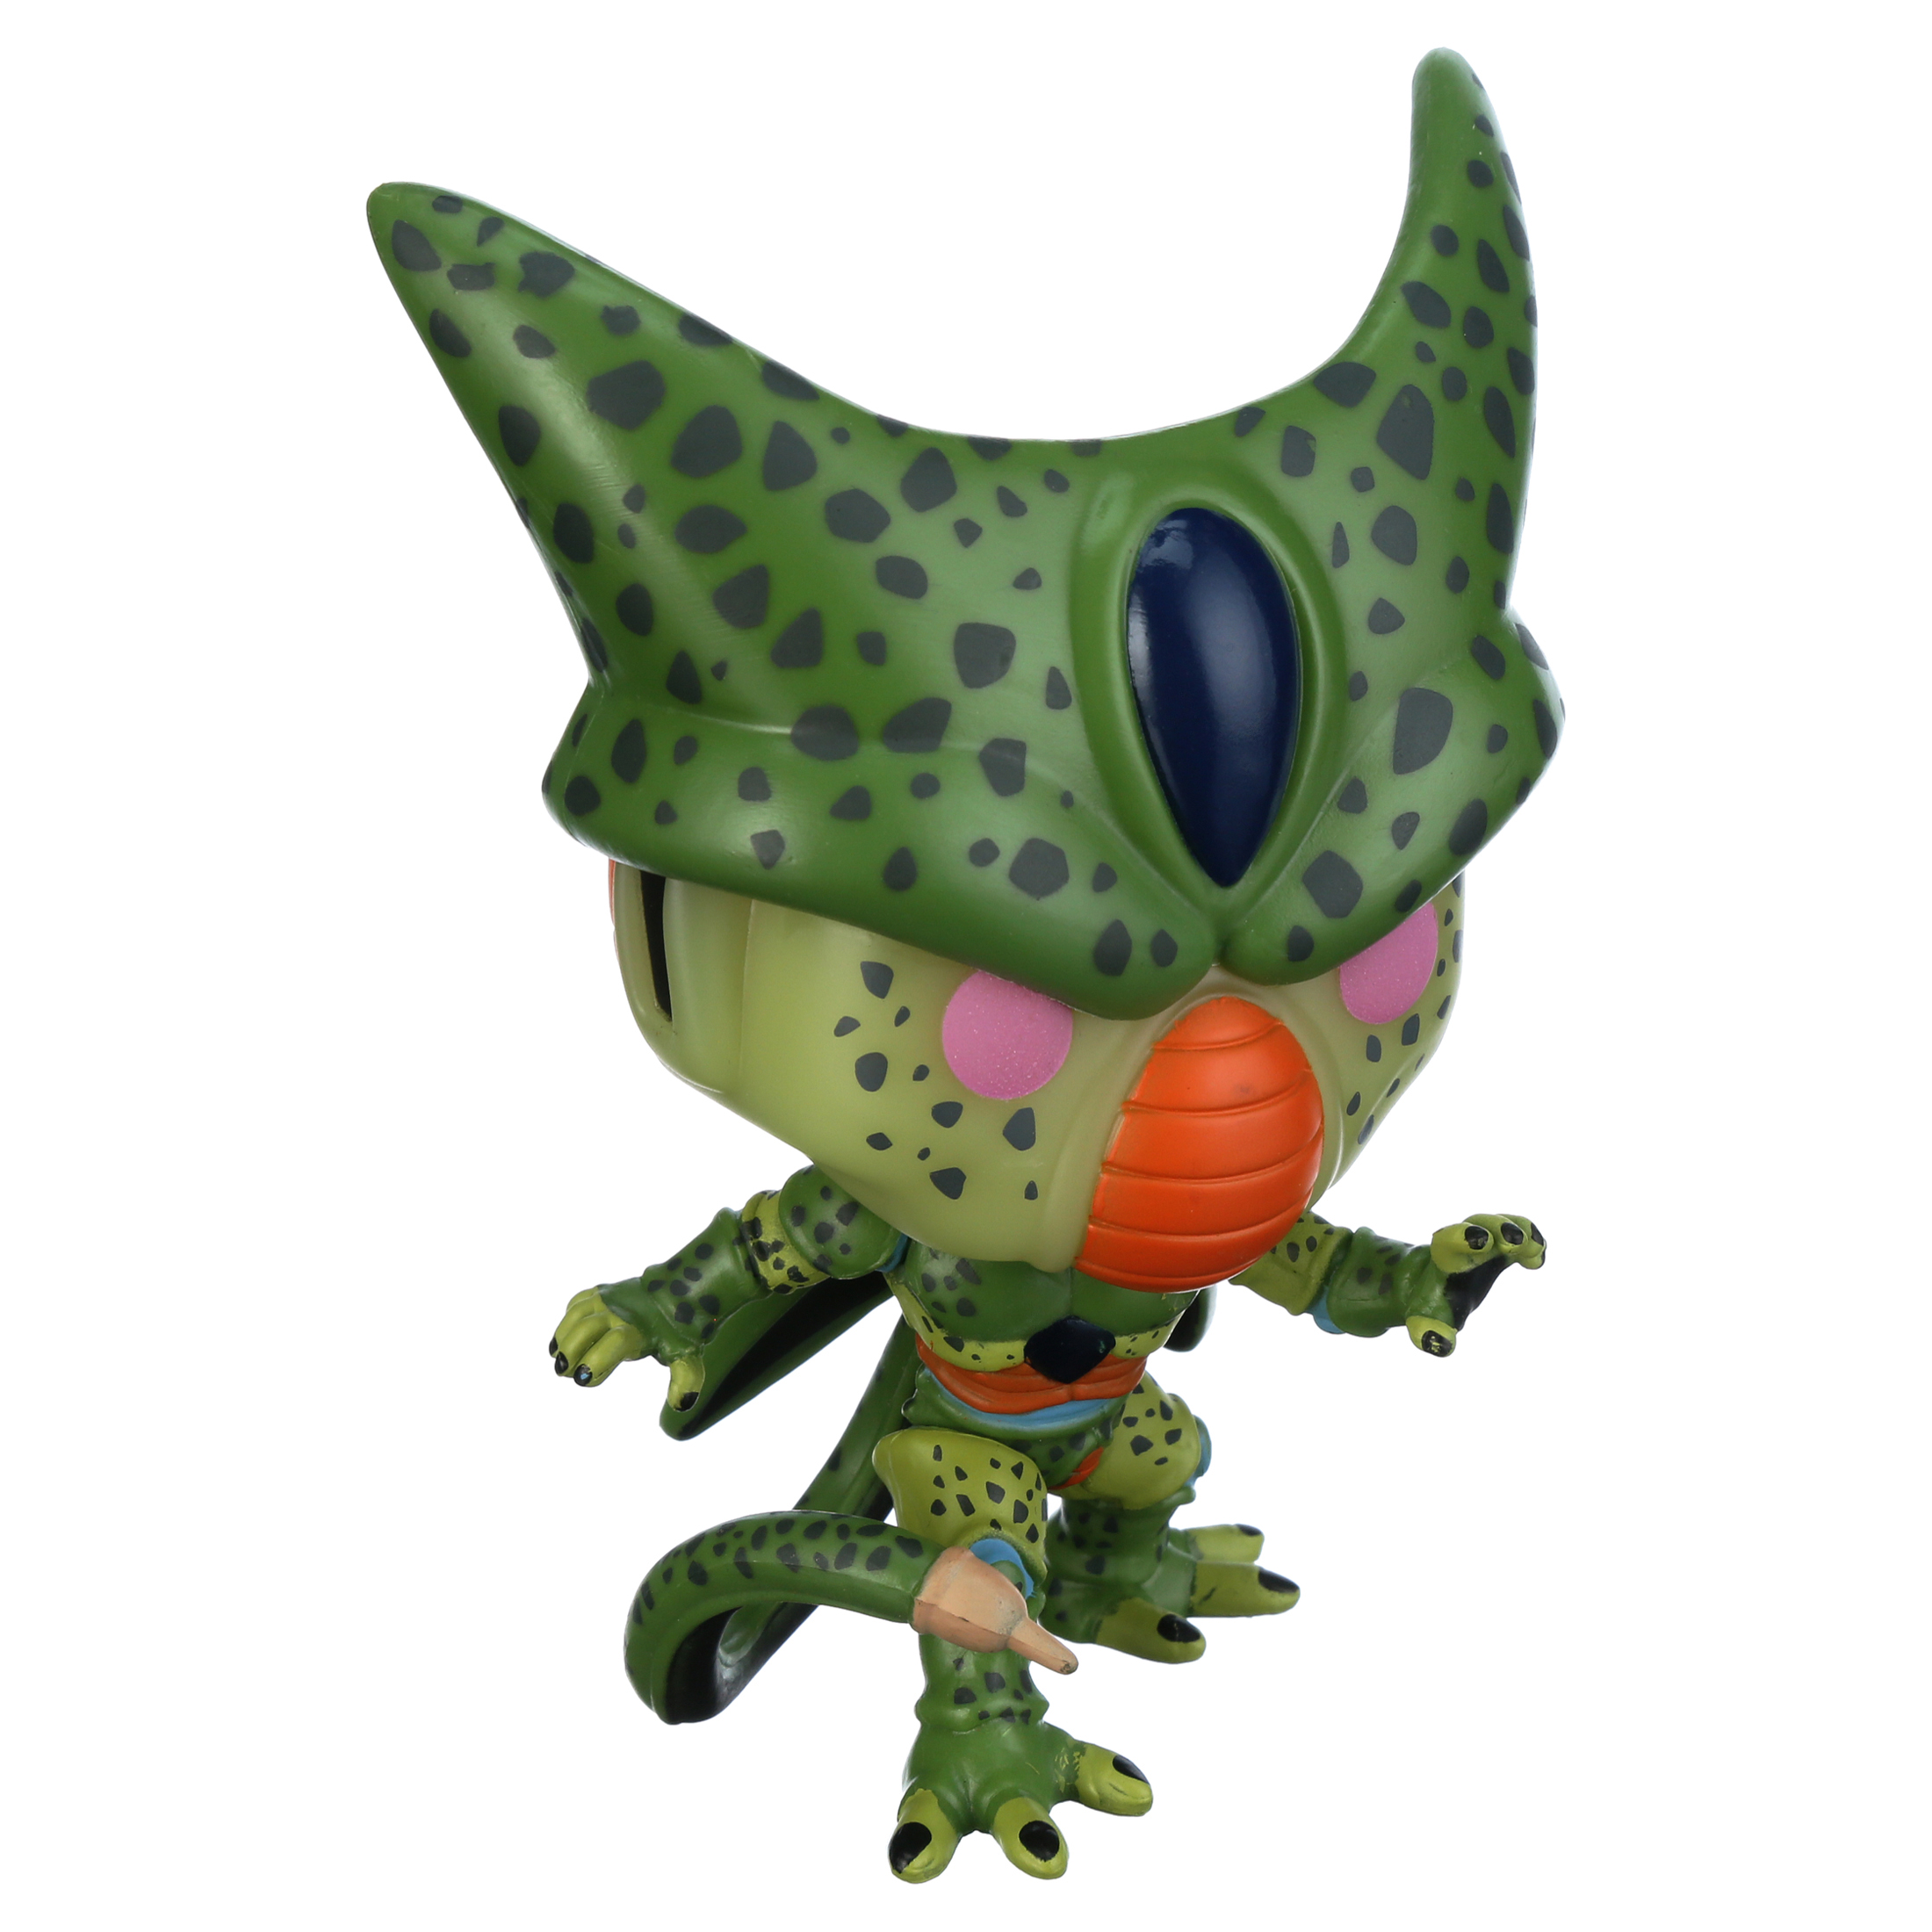 Funko POP! Animation: Dragon Ball Z - Cell (First Form) (Glow) - Walmart Exclusive - image 3 of 6